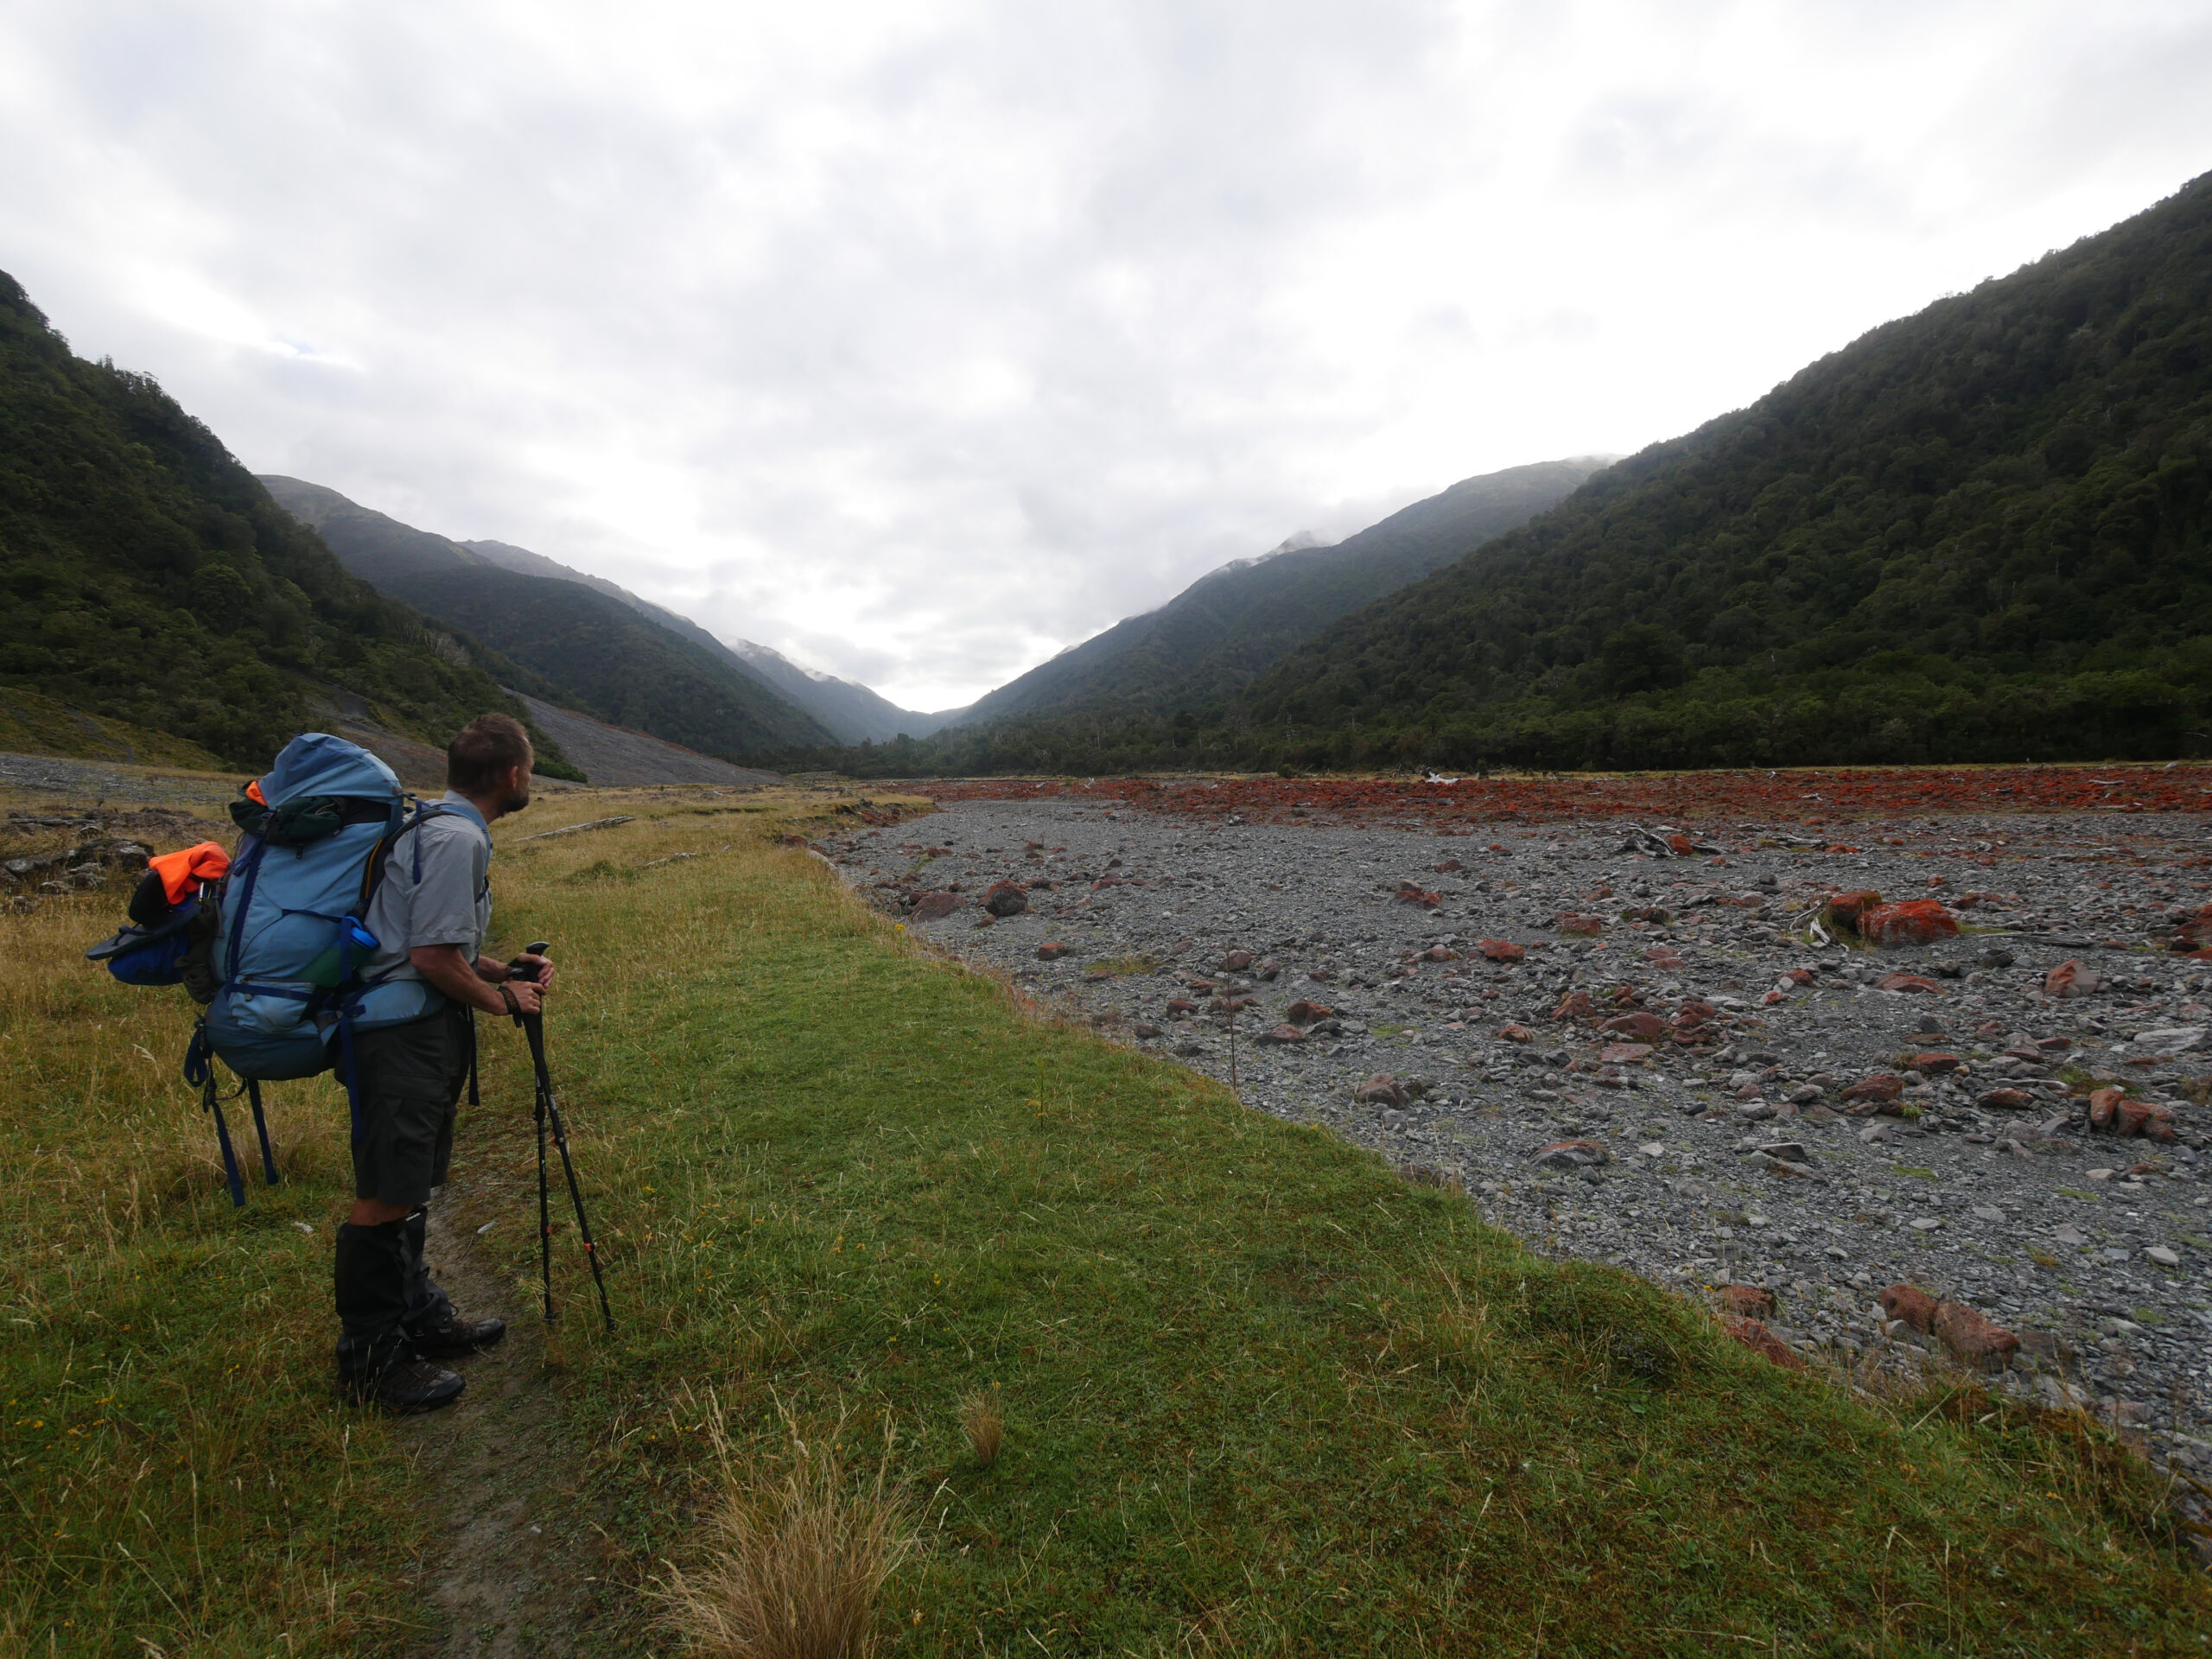 A hiker looks at rocks covered in red, Irish moss in the Taramakau River in Arthur's Pass National Park.